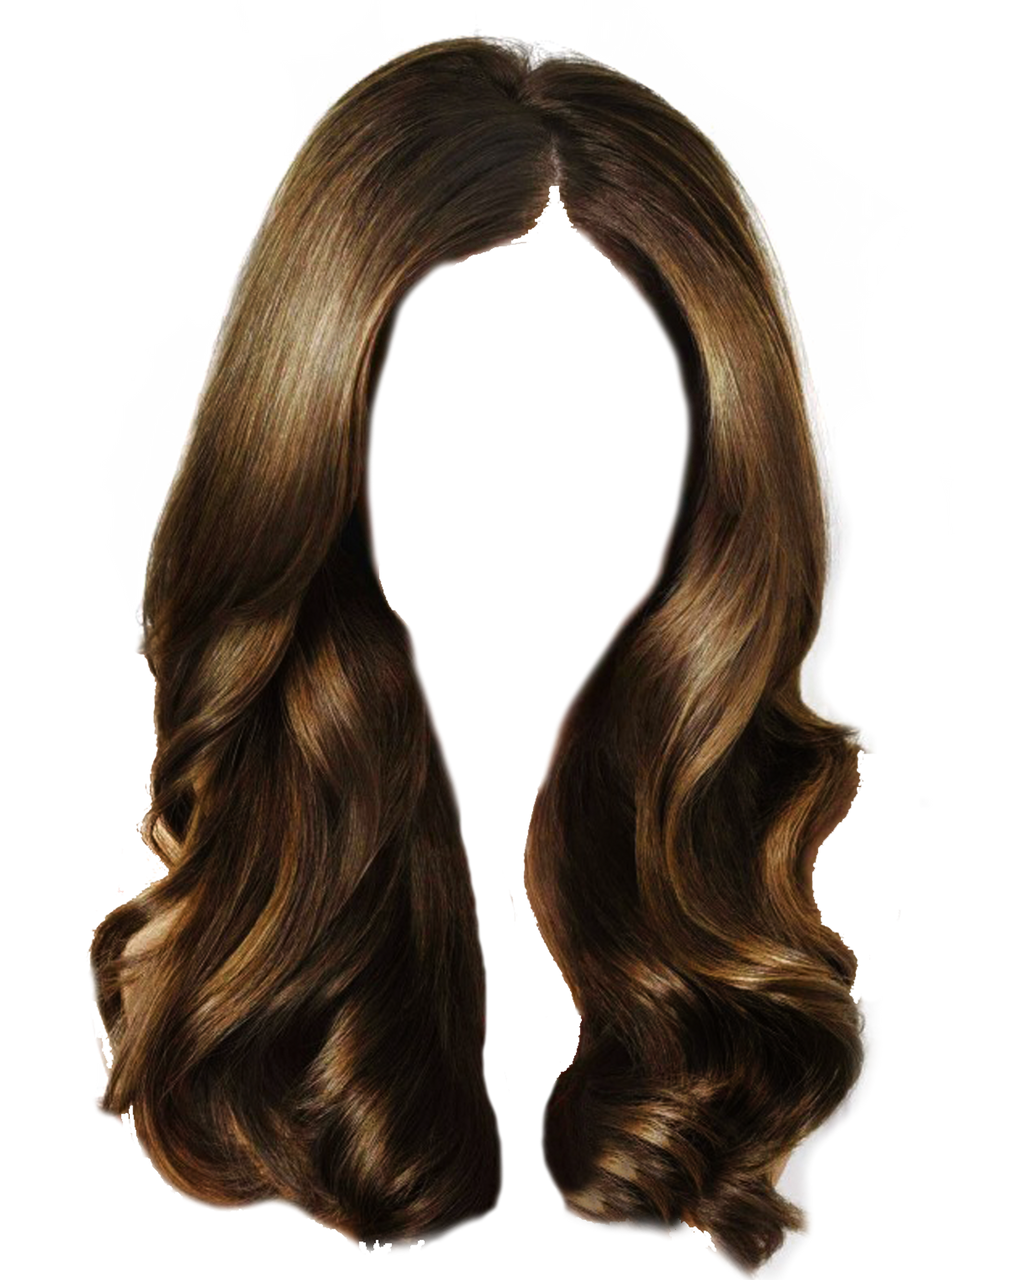 Png Hair 7 by Moonglowlilly on DeviantArt